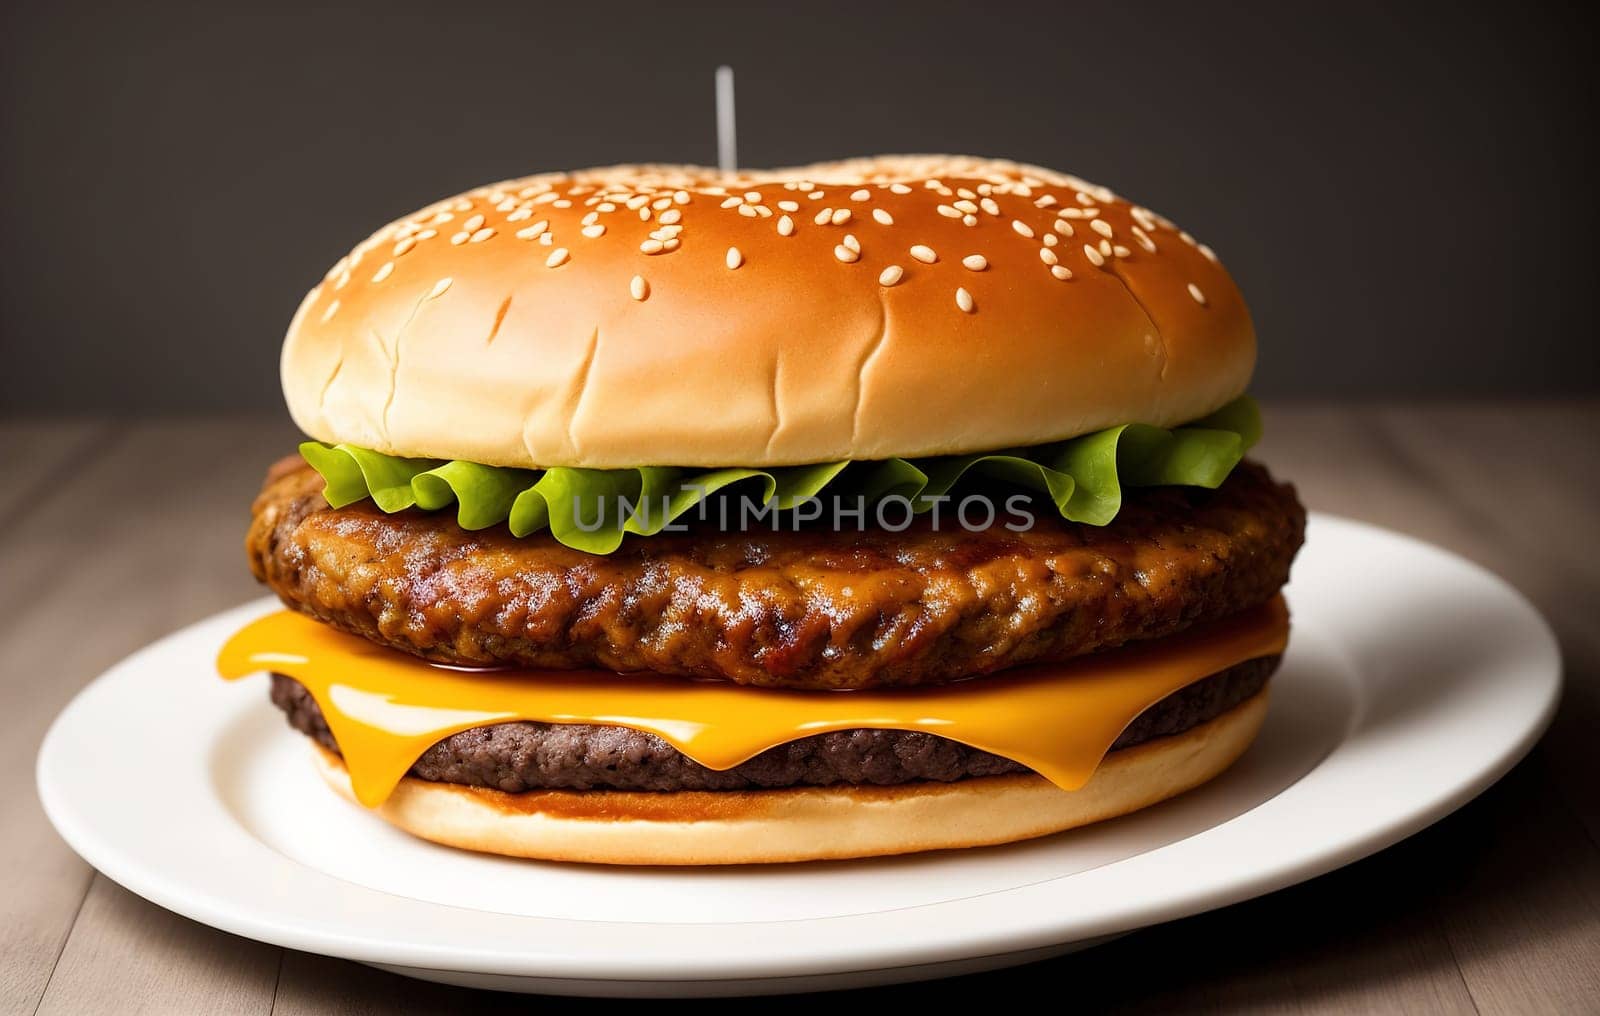 Big Hamburger with French Fries on a plate by macroarting